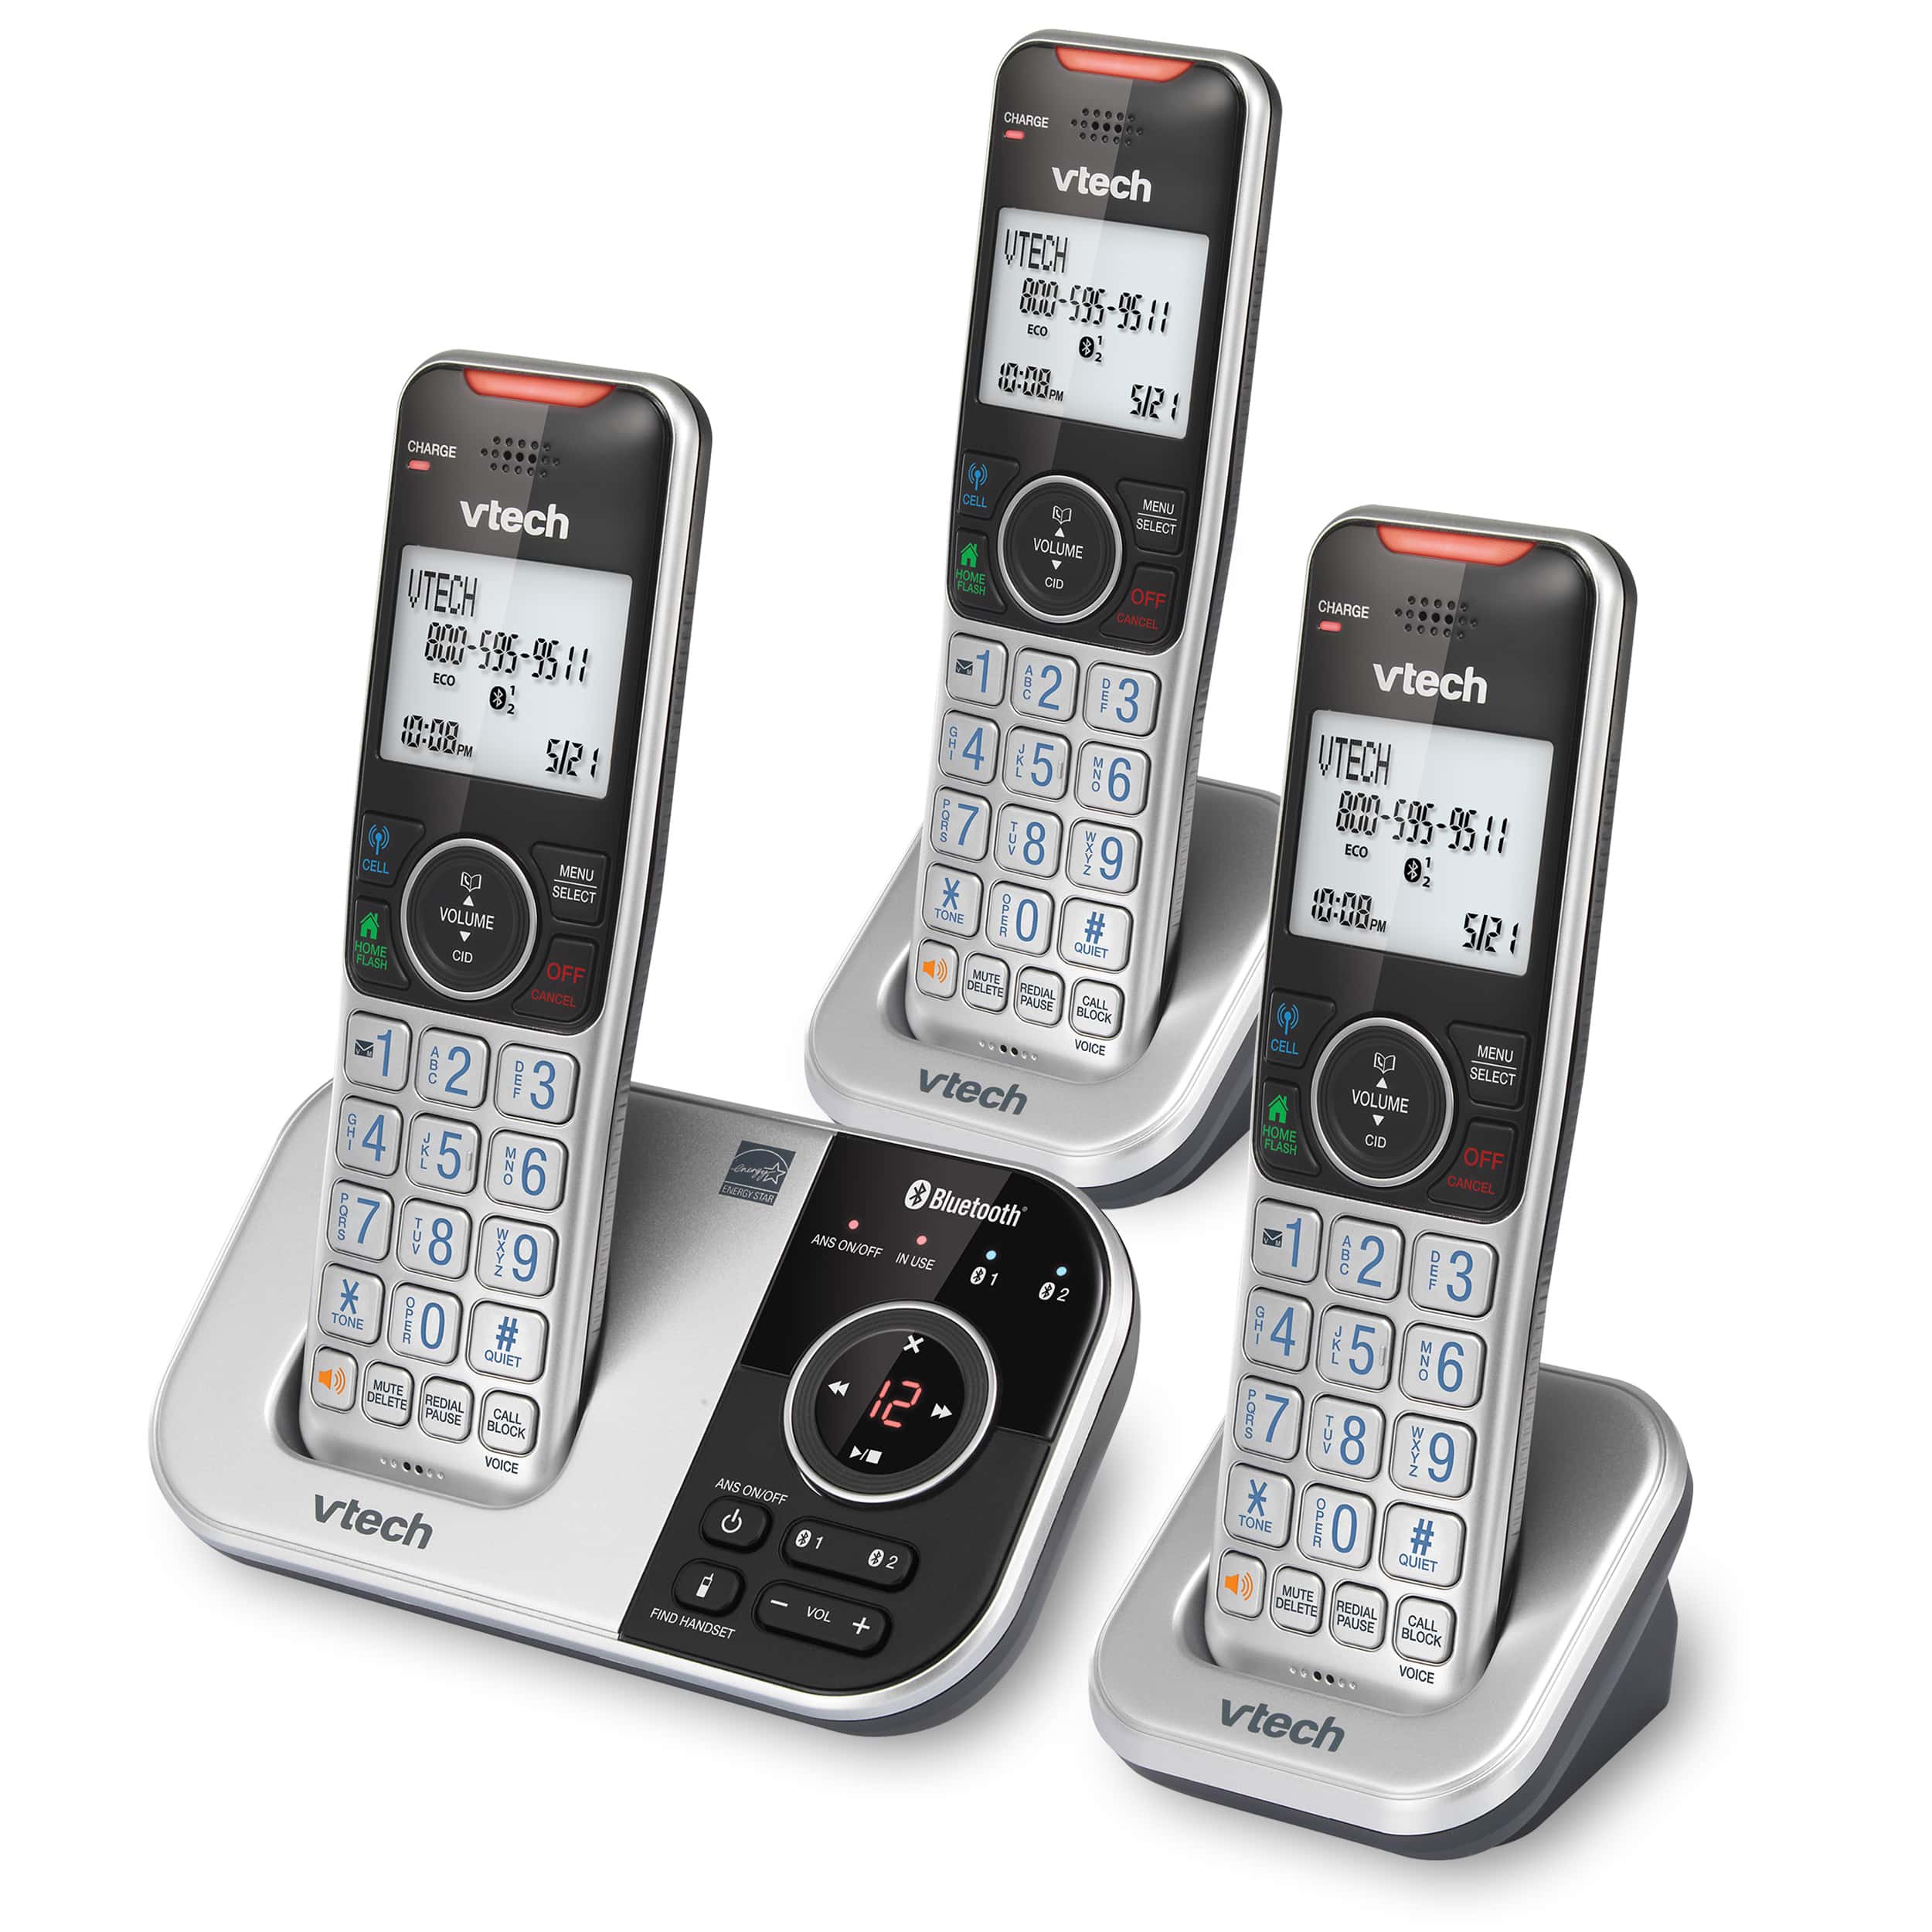 3-Handset Expandable Cordless Phone with Bluetooth Connect to Cell, Smart Call Blocker and Answering System (Silver & Black) - view 2